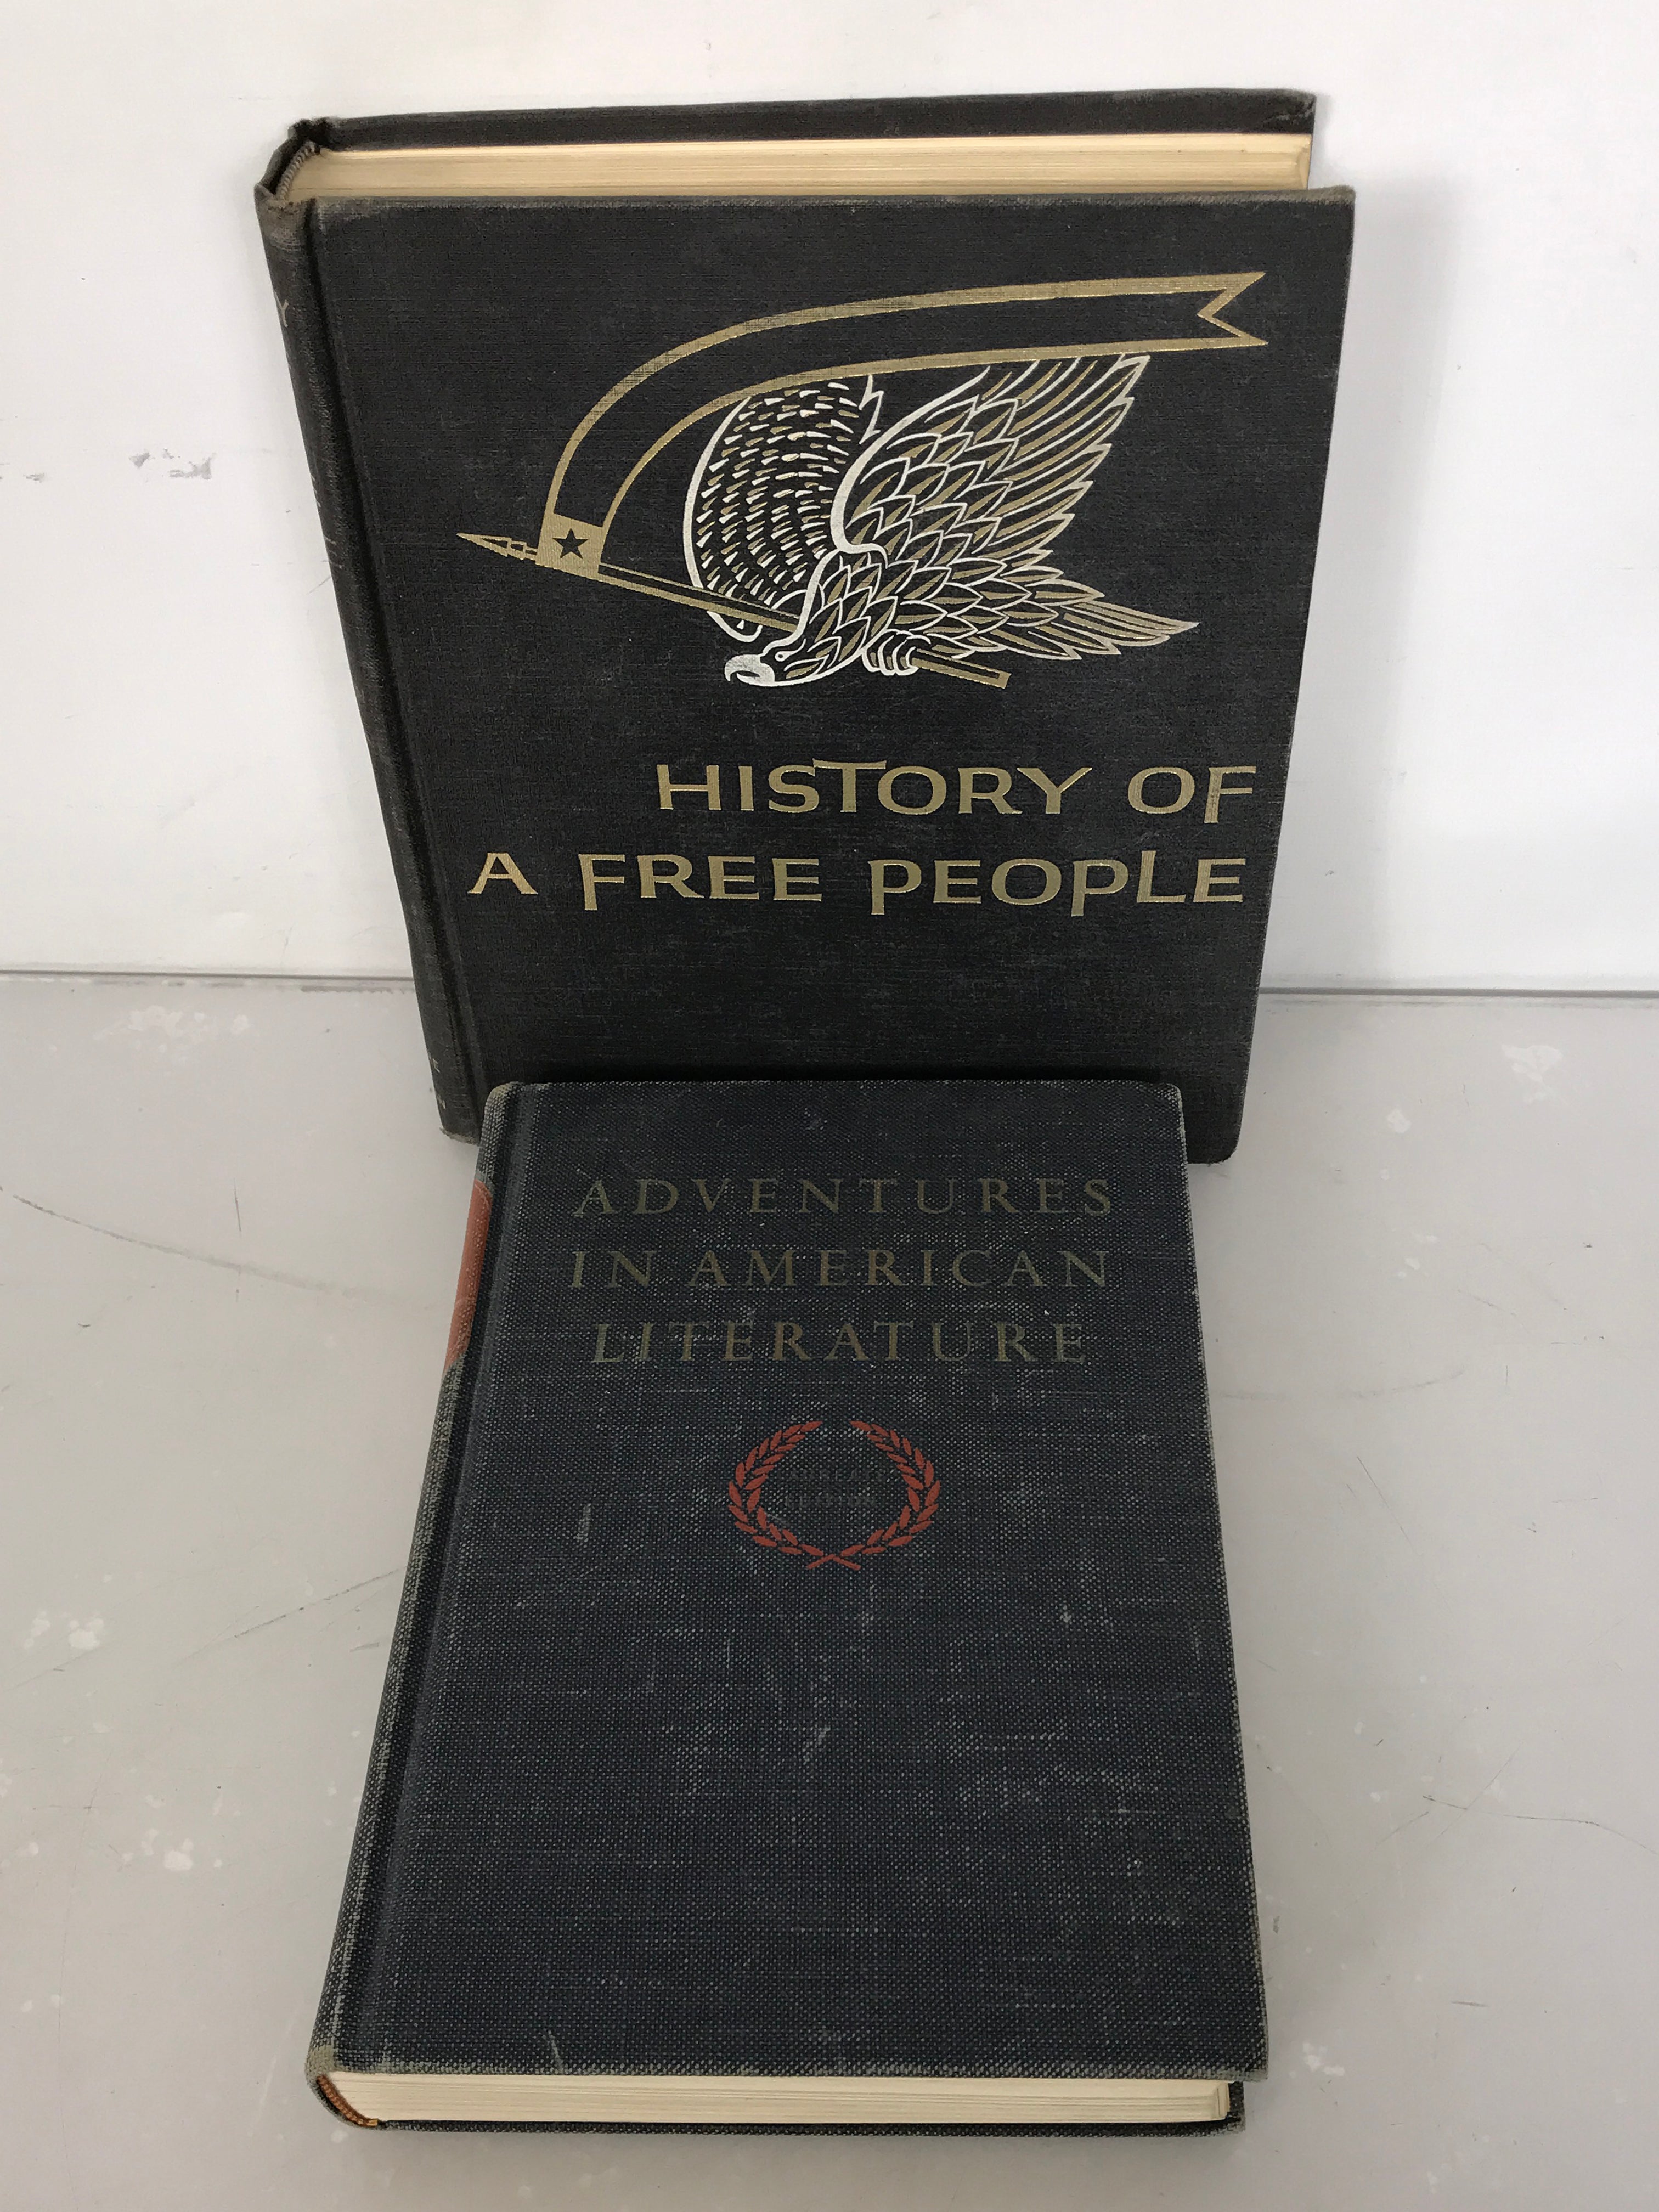 Lot of 2 Vintage Textbooks: History of a Free People by Bragdon and McCutchen (1964) and Adventures in American Literature by Fuller and Kinnick (1963) HC